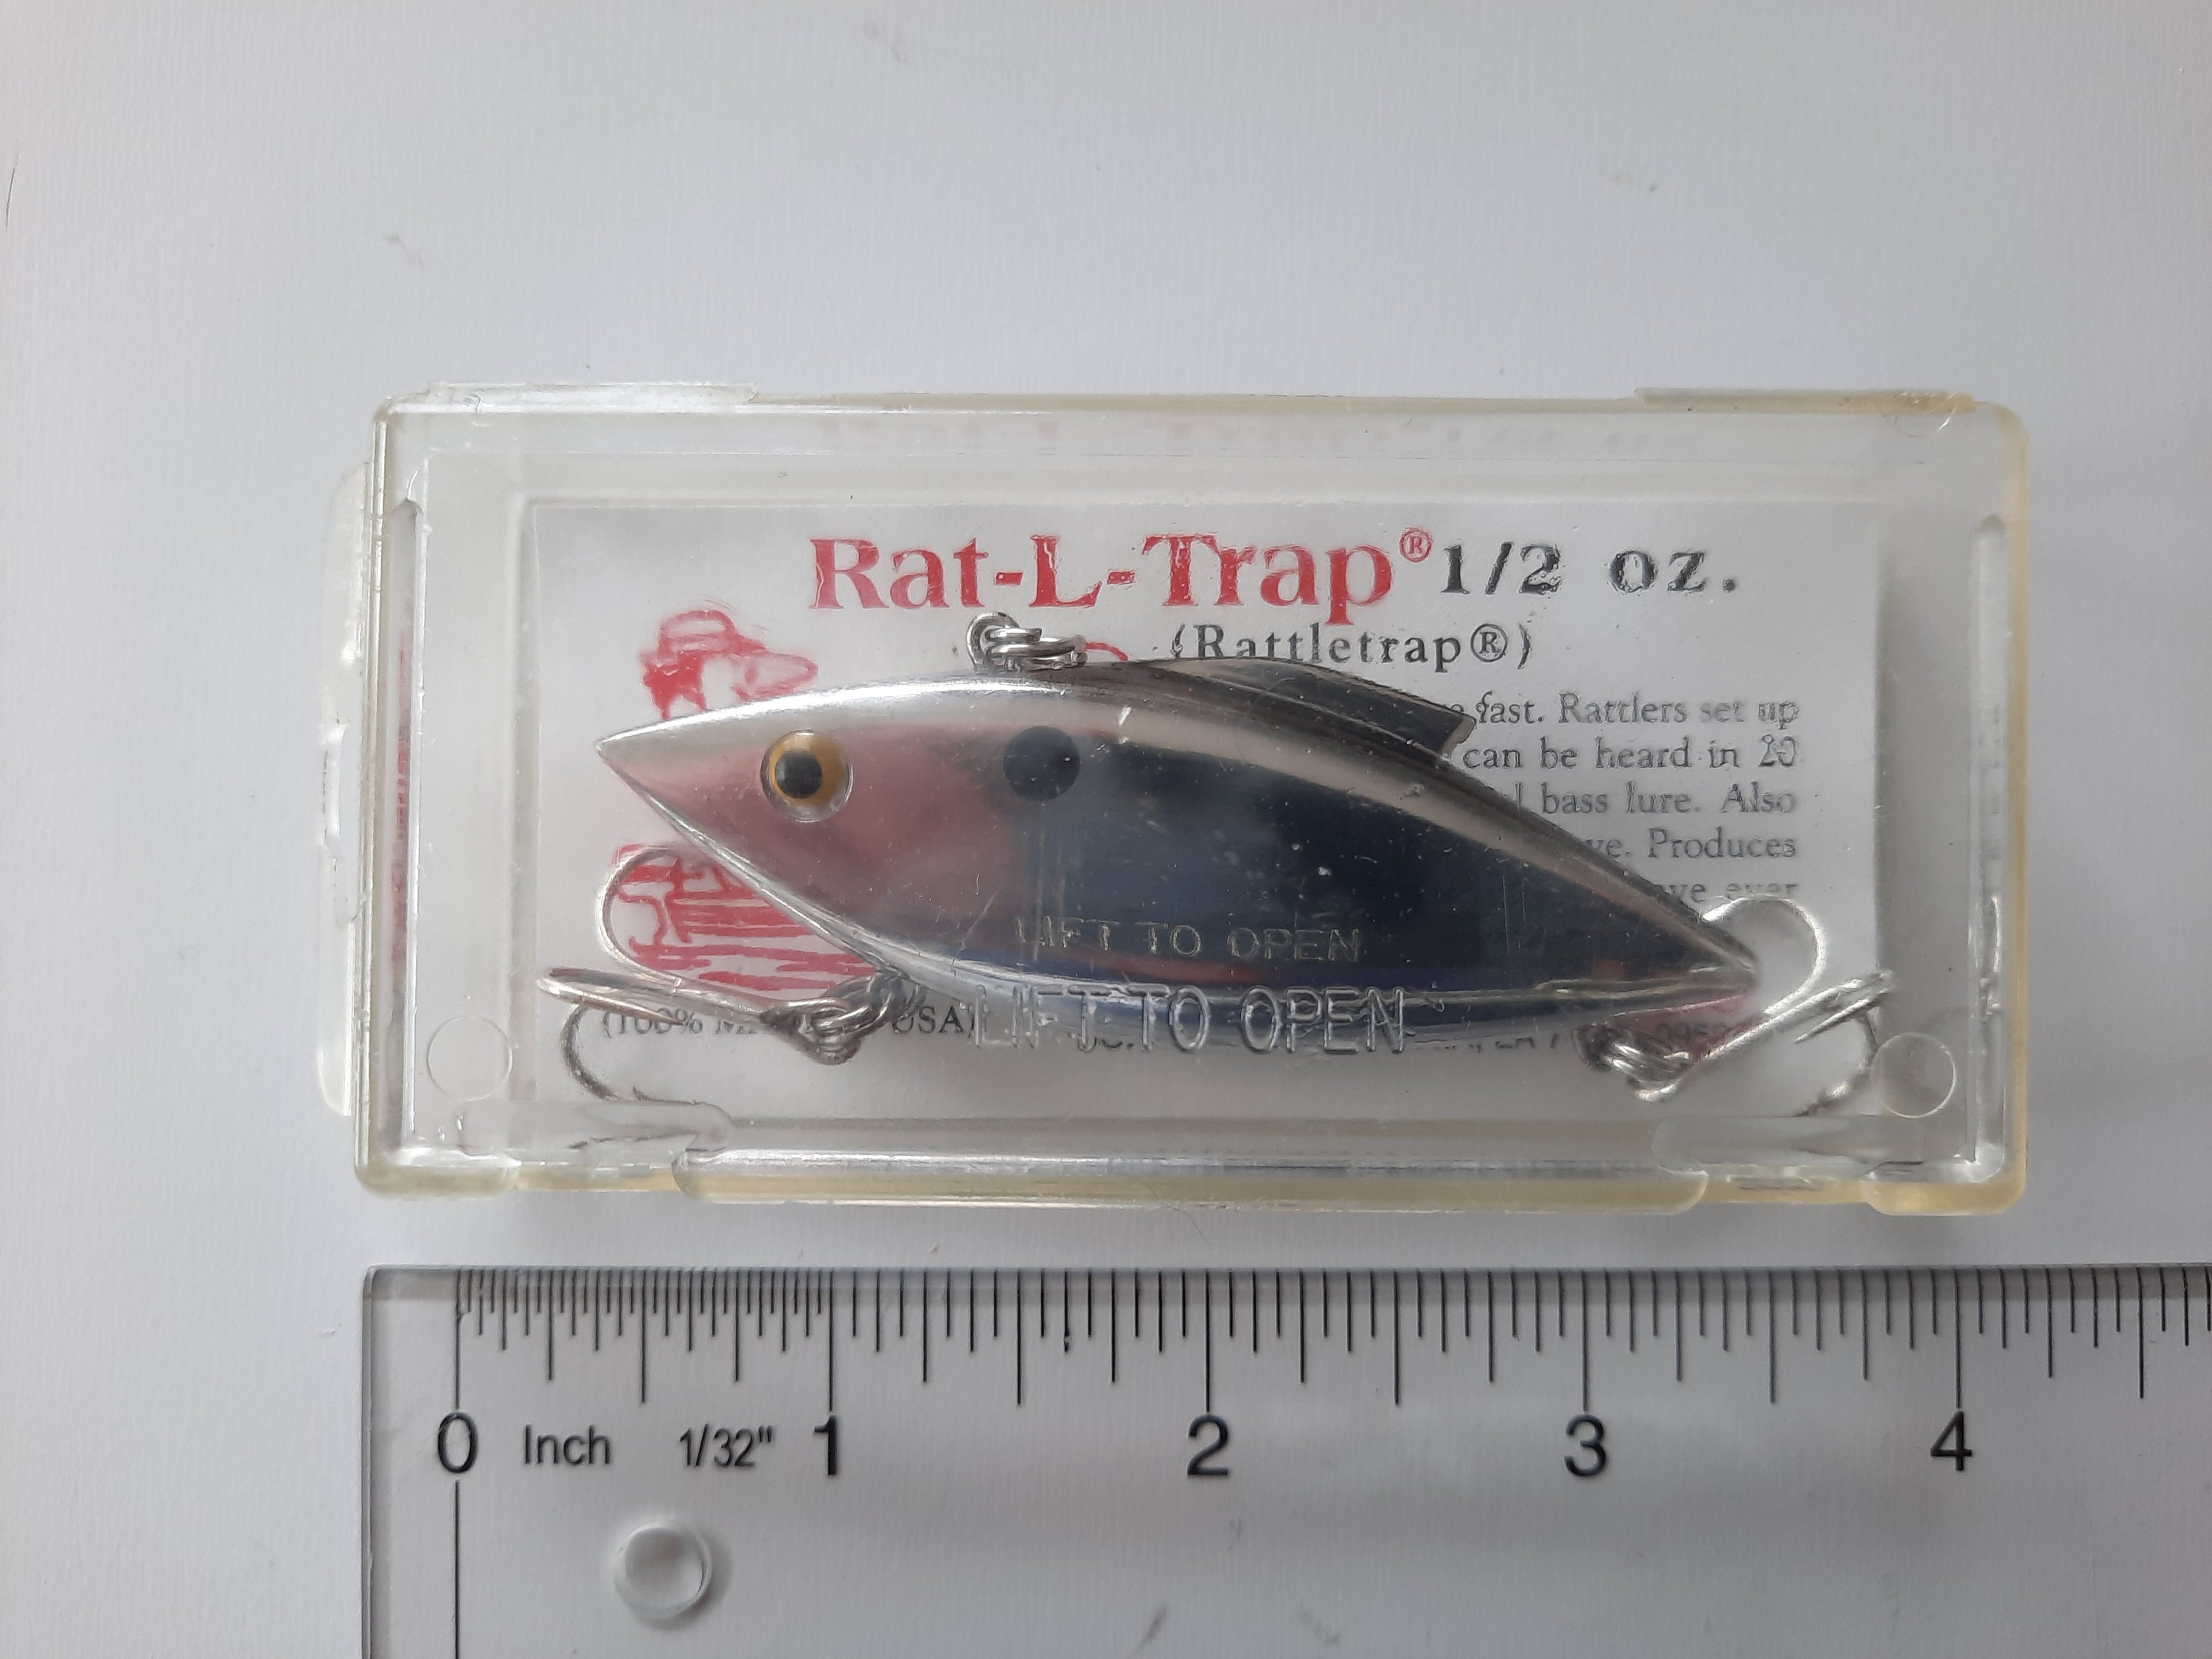 Vintage 1970s Bass Lure: Bill Lewis Lures, Rat-L-Trap, Chrome/Black Top,  3, 1/2 oz. Like New in Original Package ~ Scarce